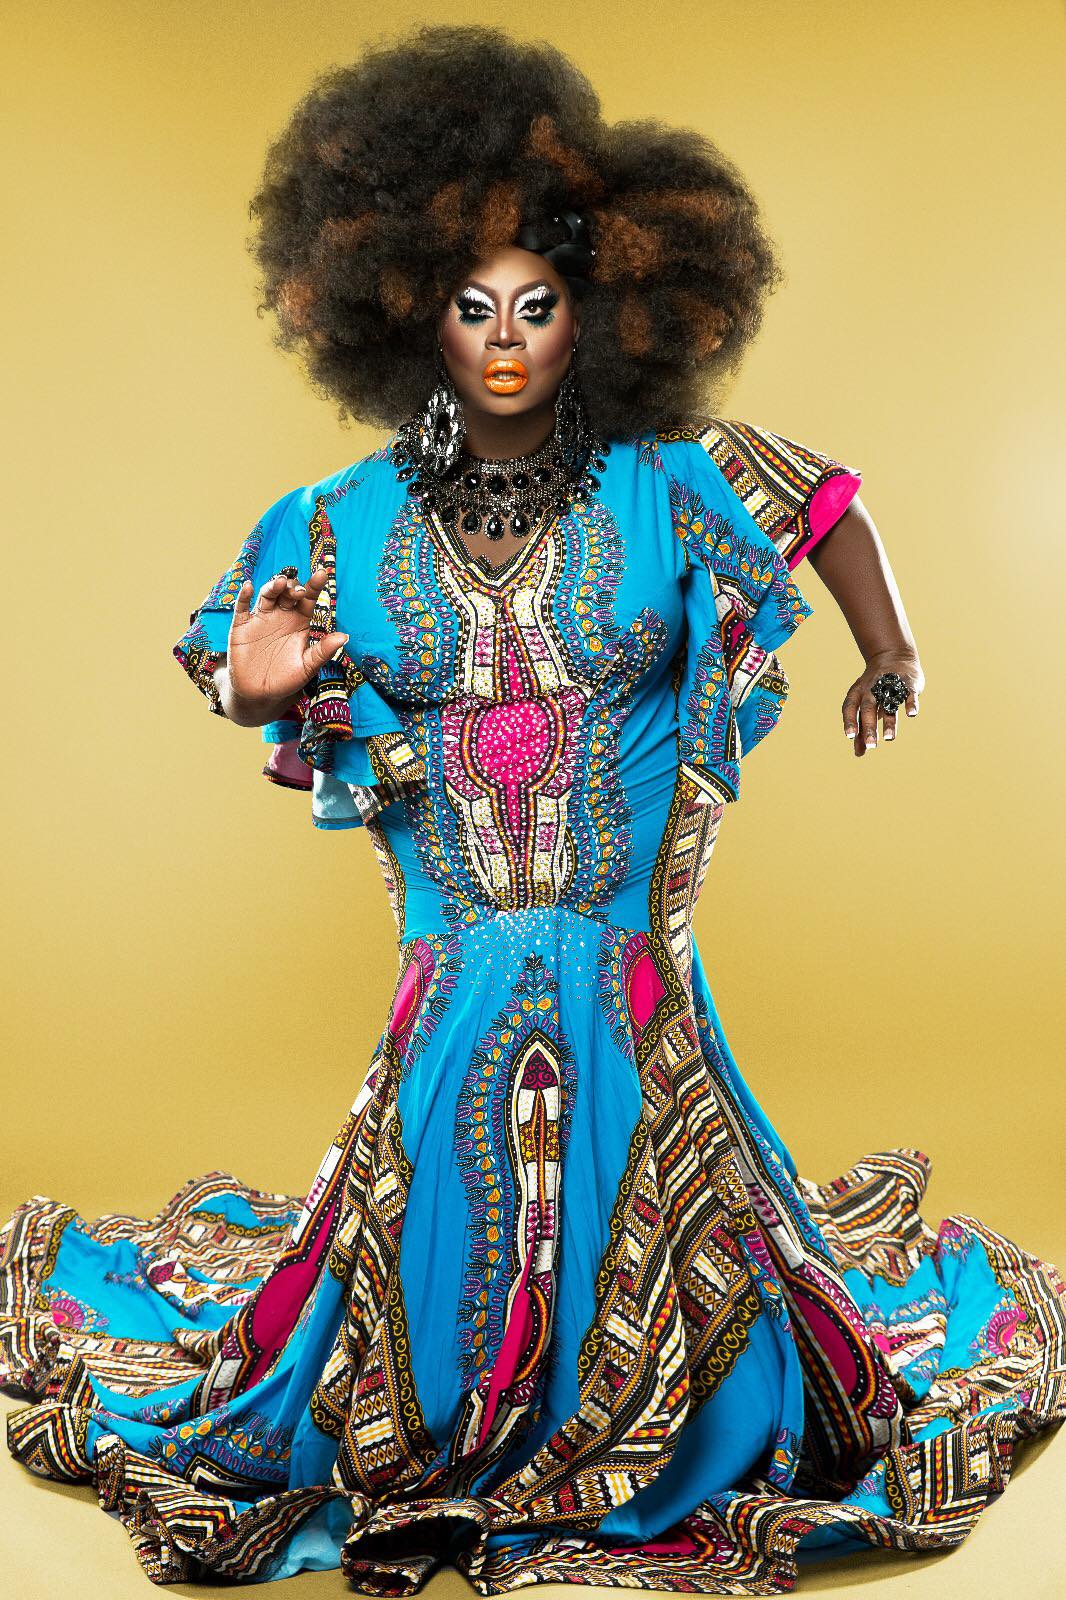 Latrice Royale - Photo by The Drag Photographer